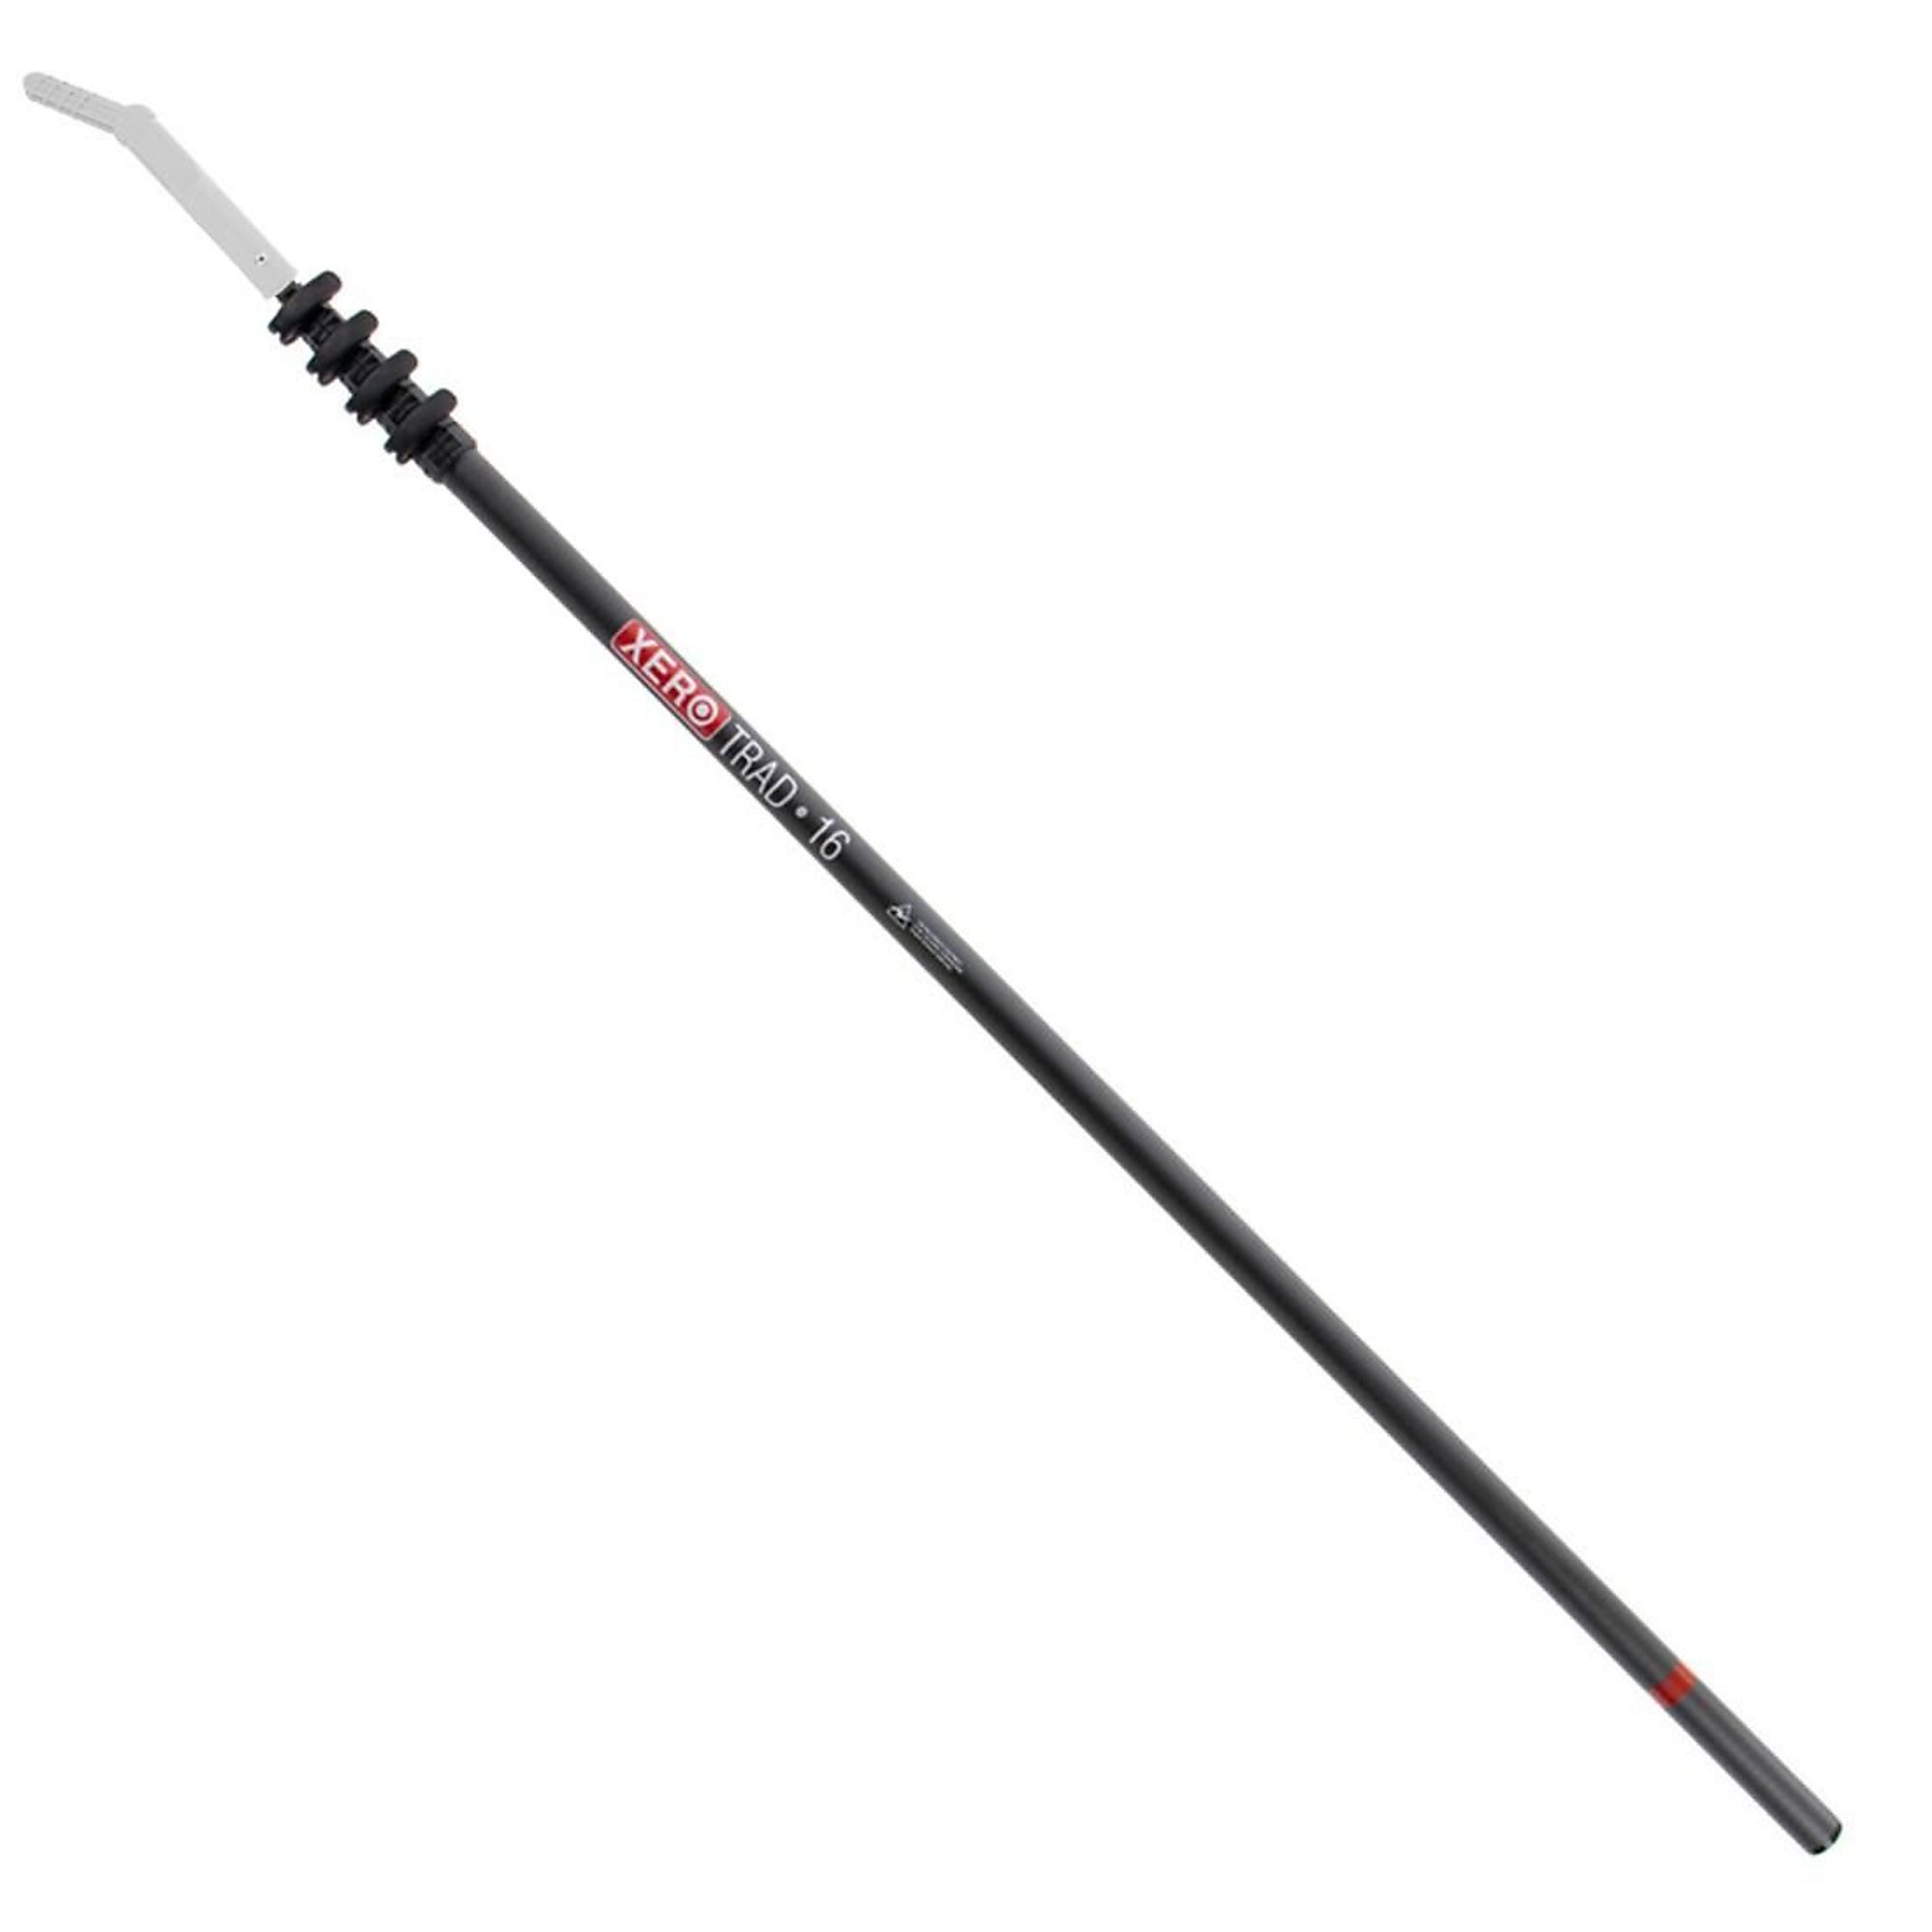 XERO, Trad Pole 2.0 Wagtail Tip - 16ft., Model 209-20-317